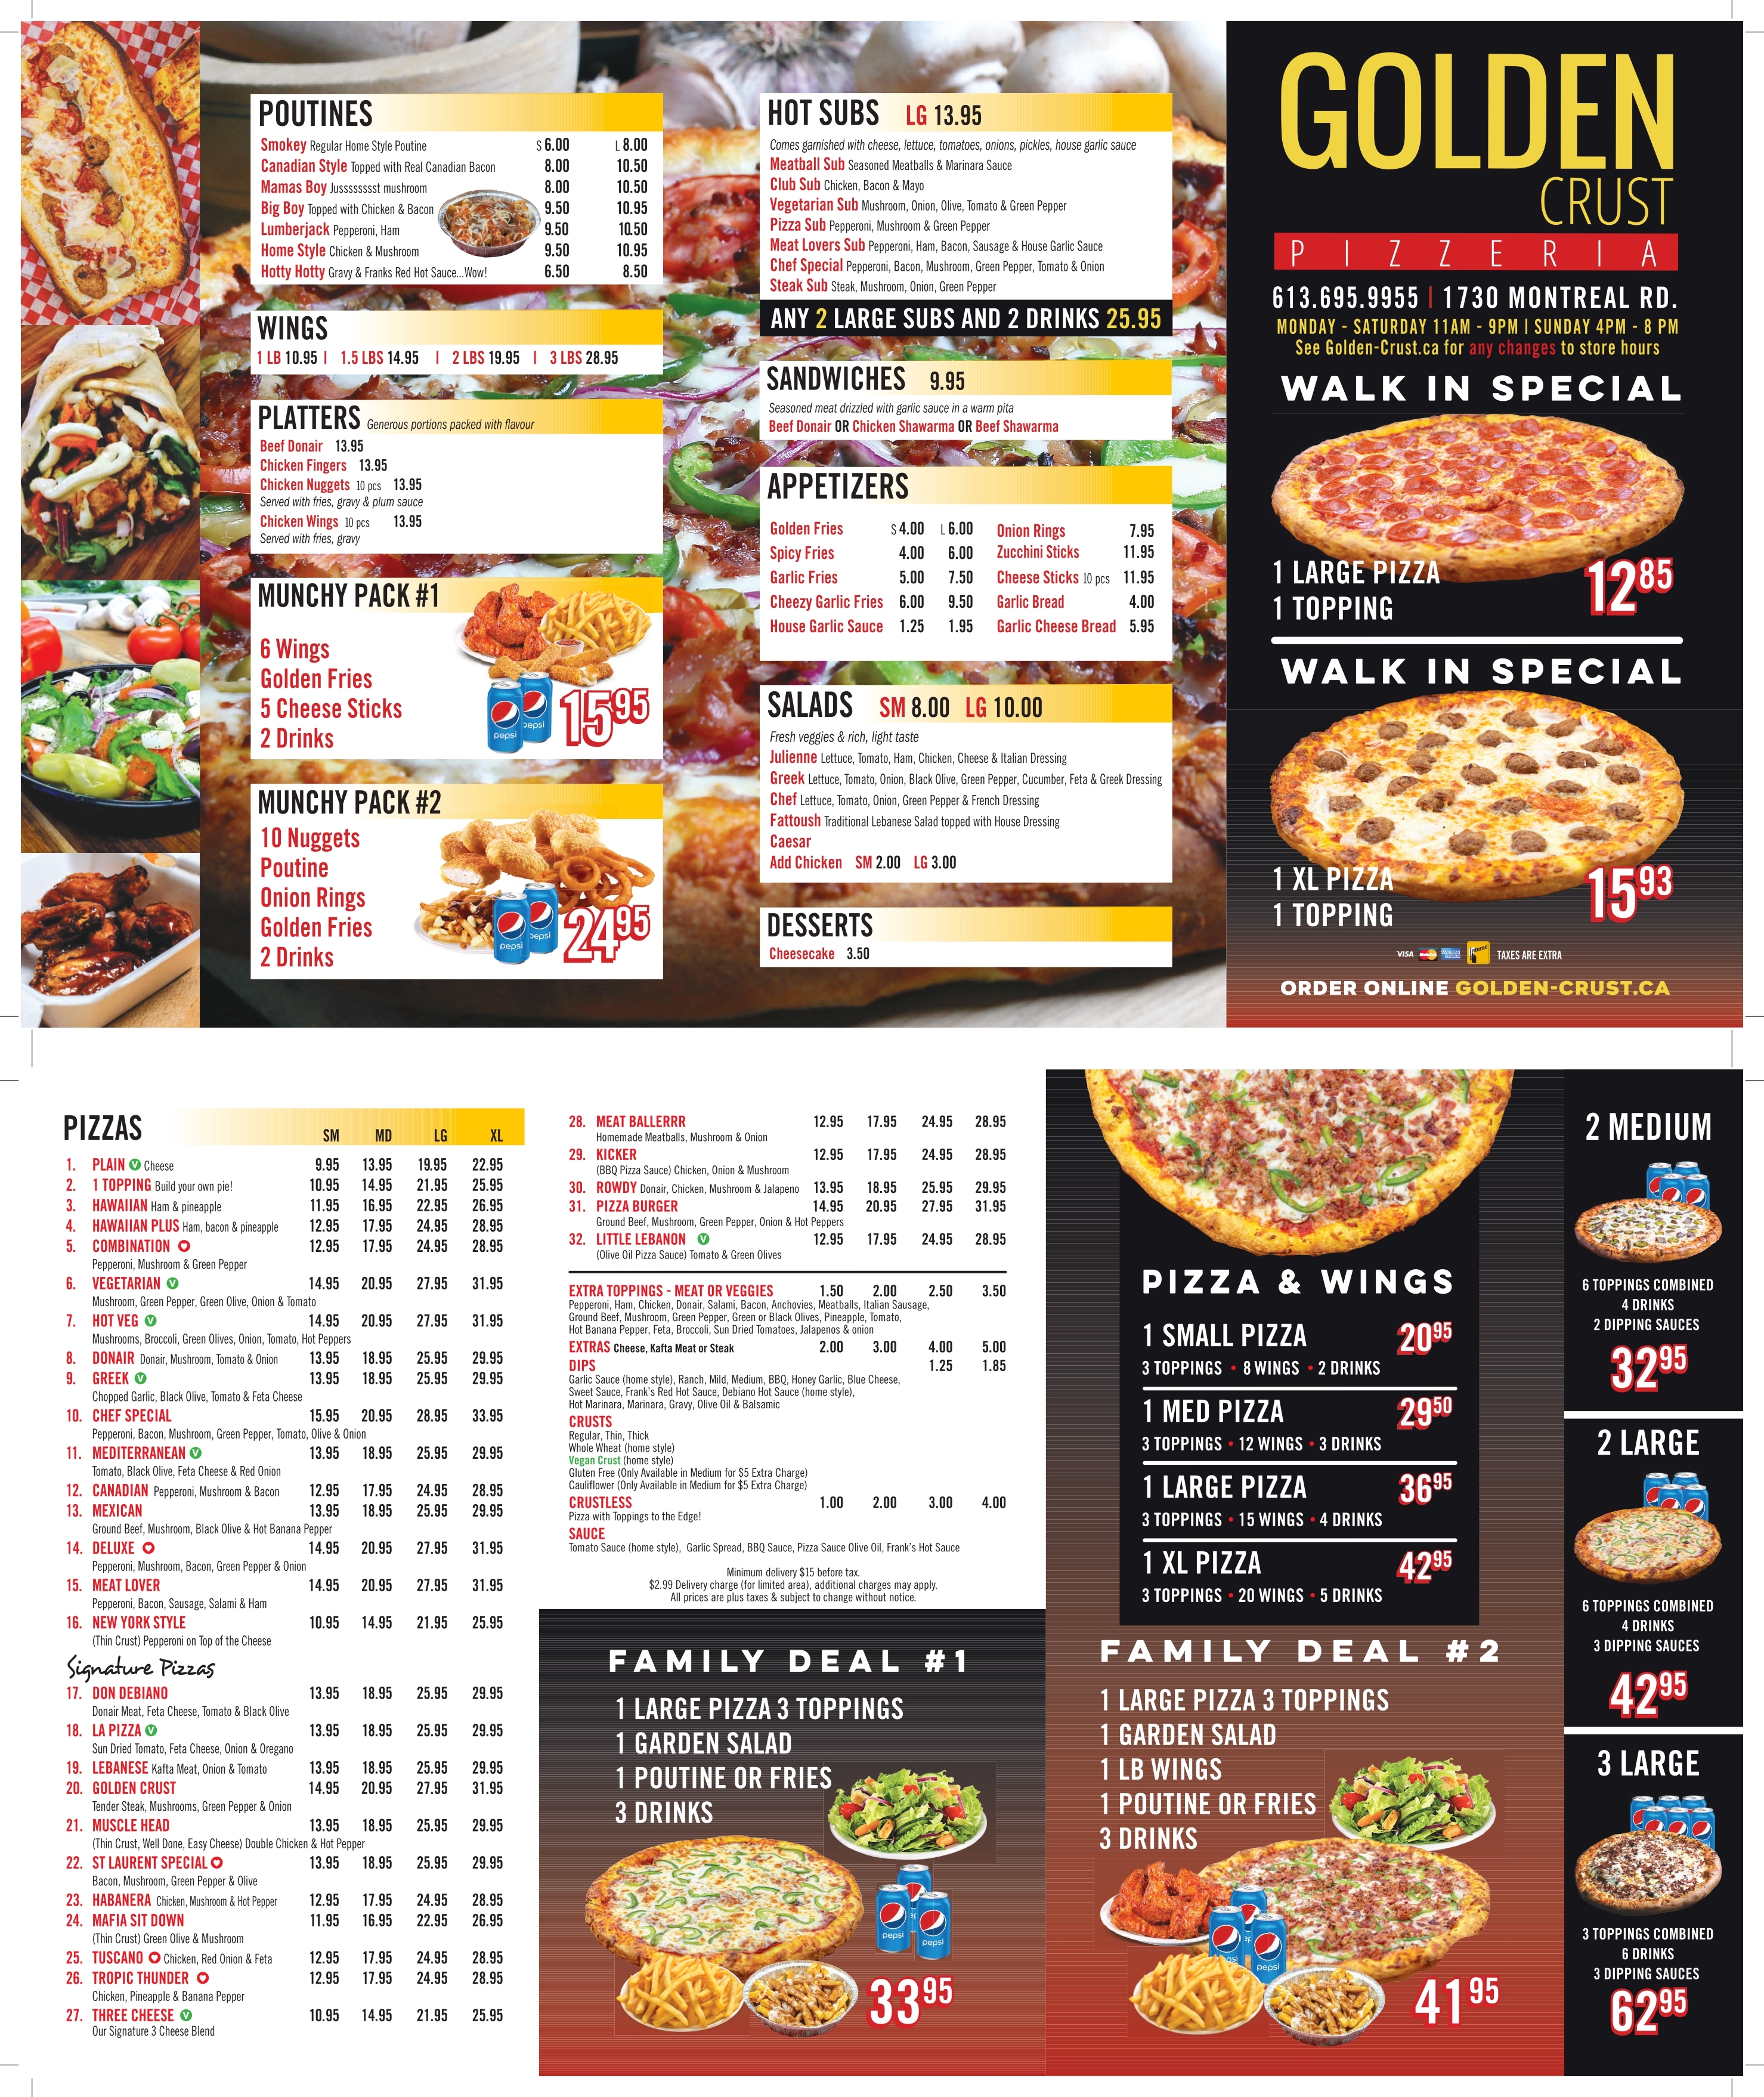 Golden Crust Pizzeria New July 2022 Menu Released (Ottawa Pizzeria) - We hope you’ve all been safe and well during this pandemic. We sincerely thank you for all of your support. Thank you.